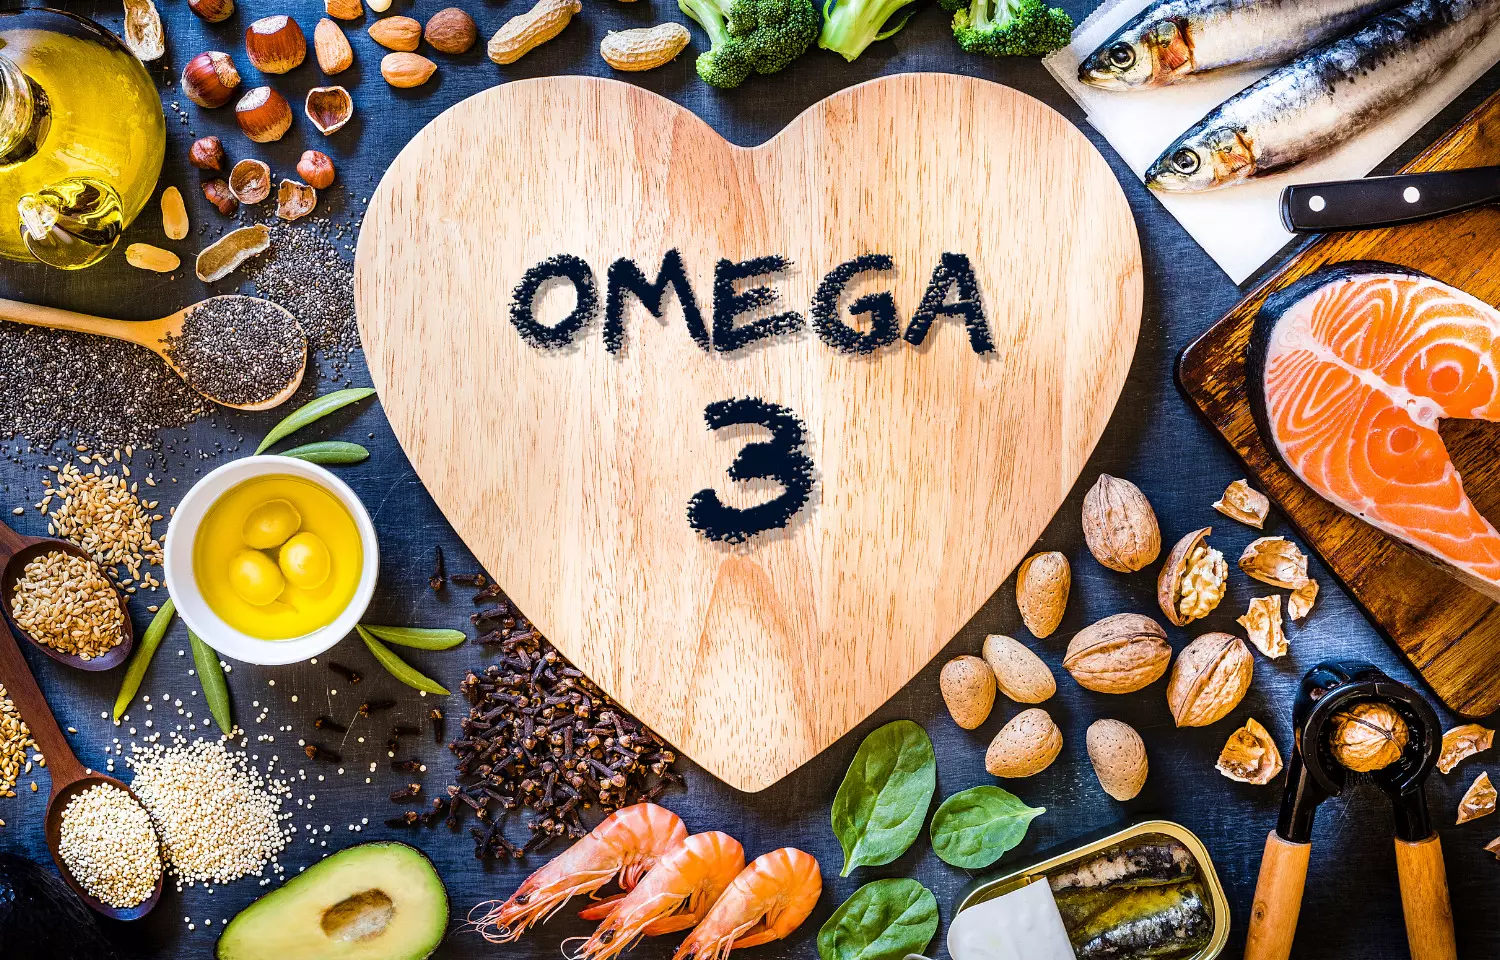 Omega-3 Fatty Acid Supplements improve vision and QoL in patients with AMD